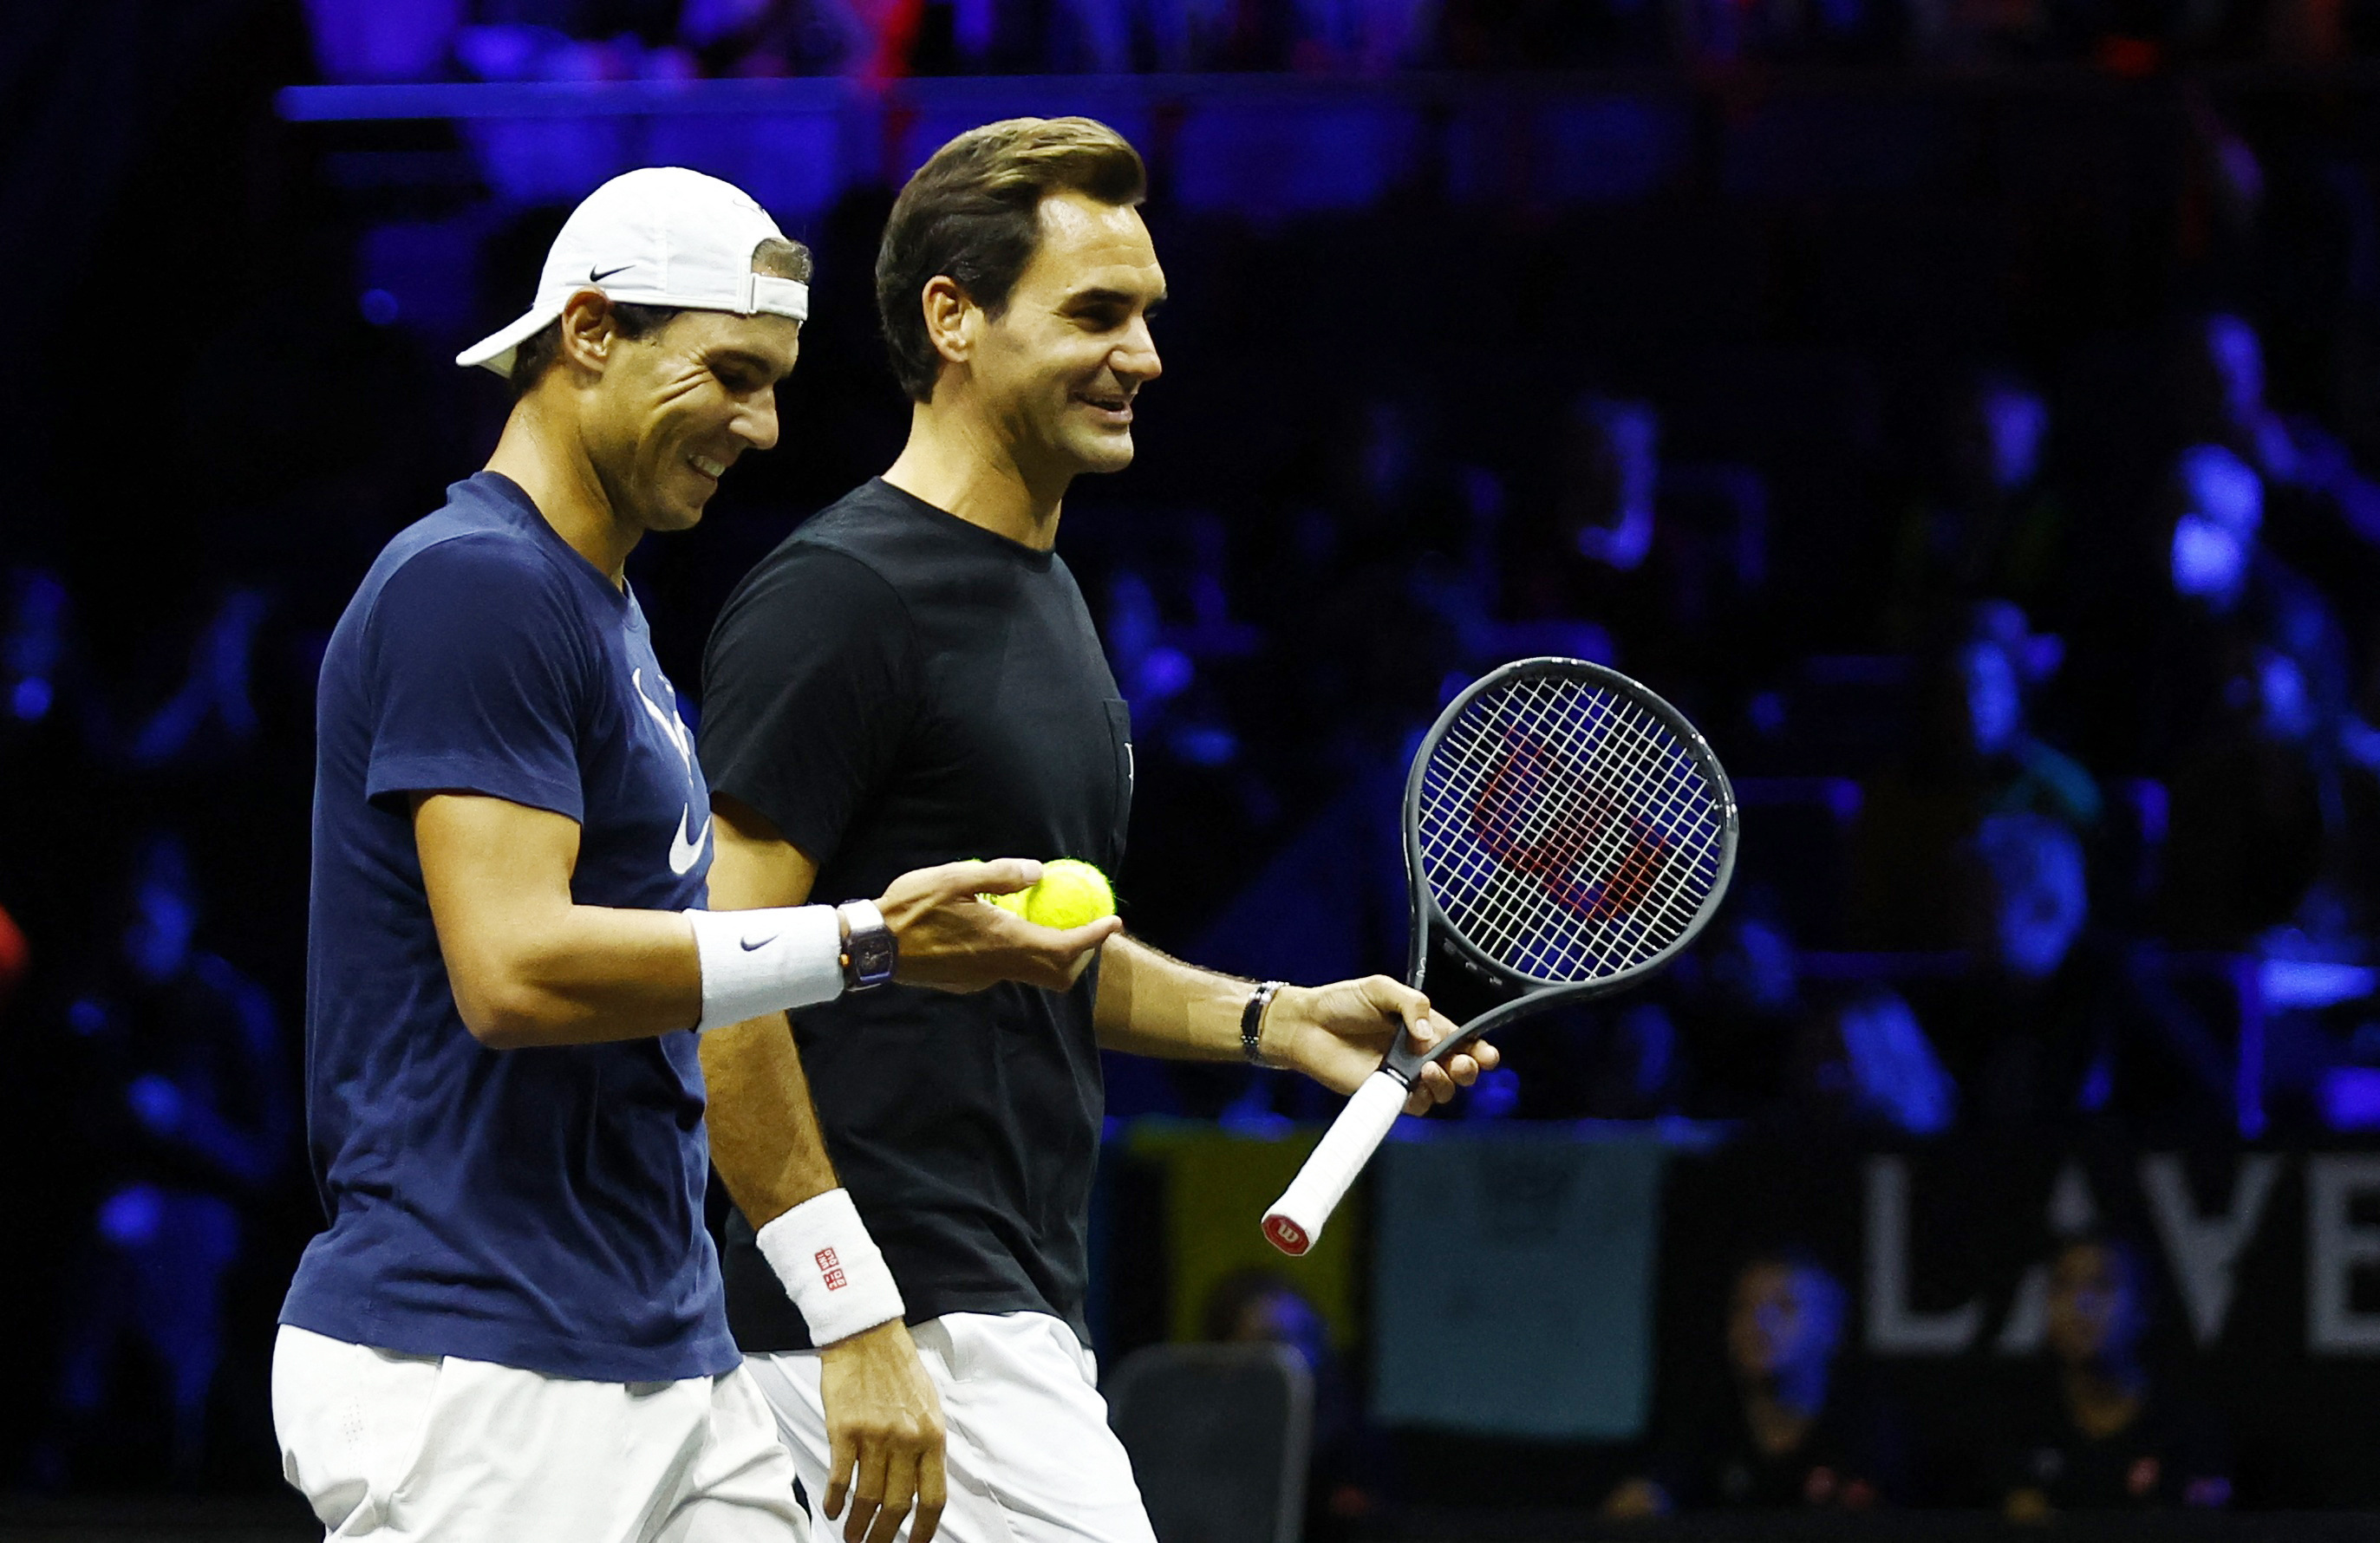 Roger Federer to Finish 24-year Career with Doubles Match Alongside Rafael Nadal